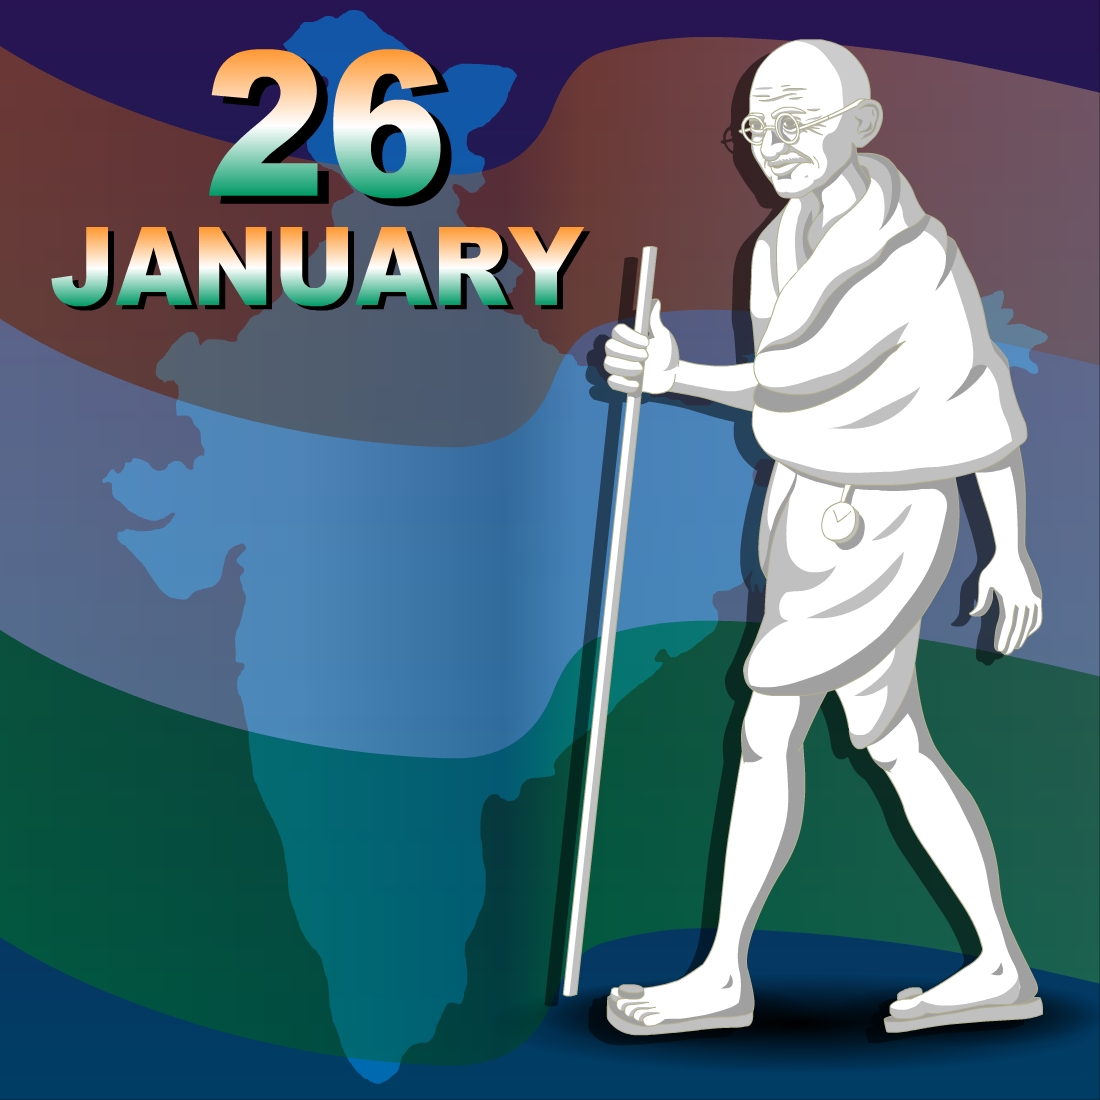 Charming image of Gandhi on the background of the Indian flag